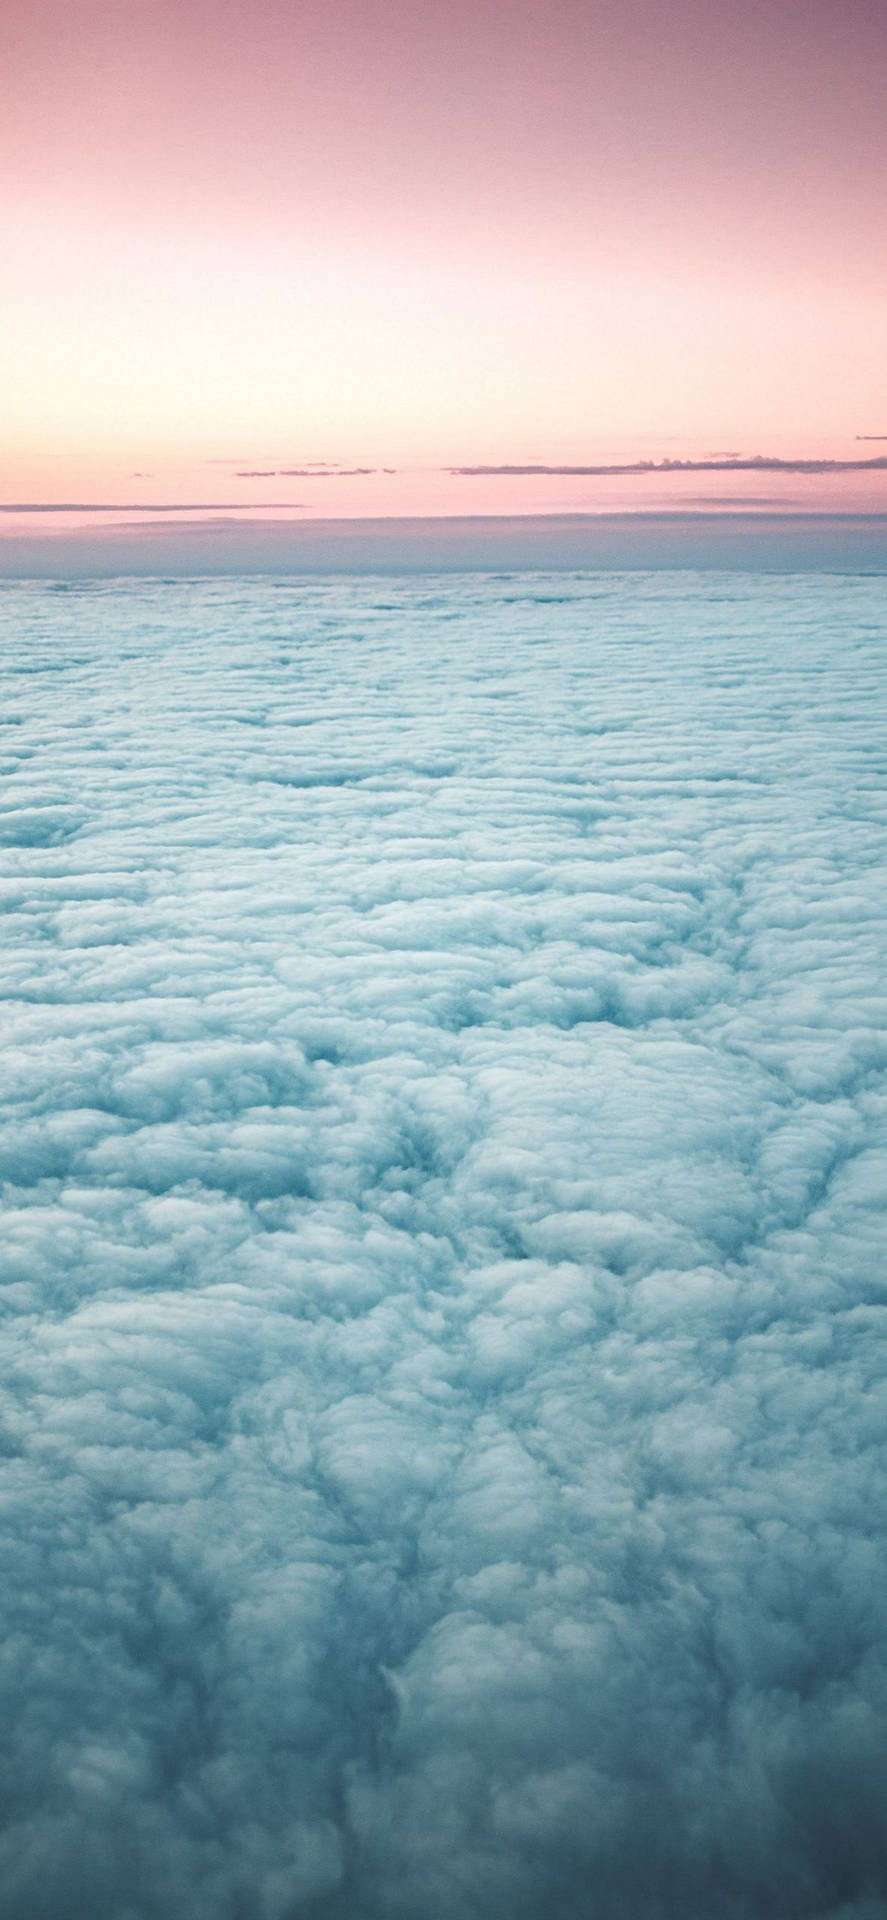 Sea Of Clouds Iphone Amoled Background